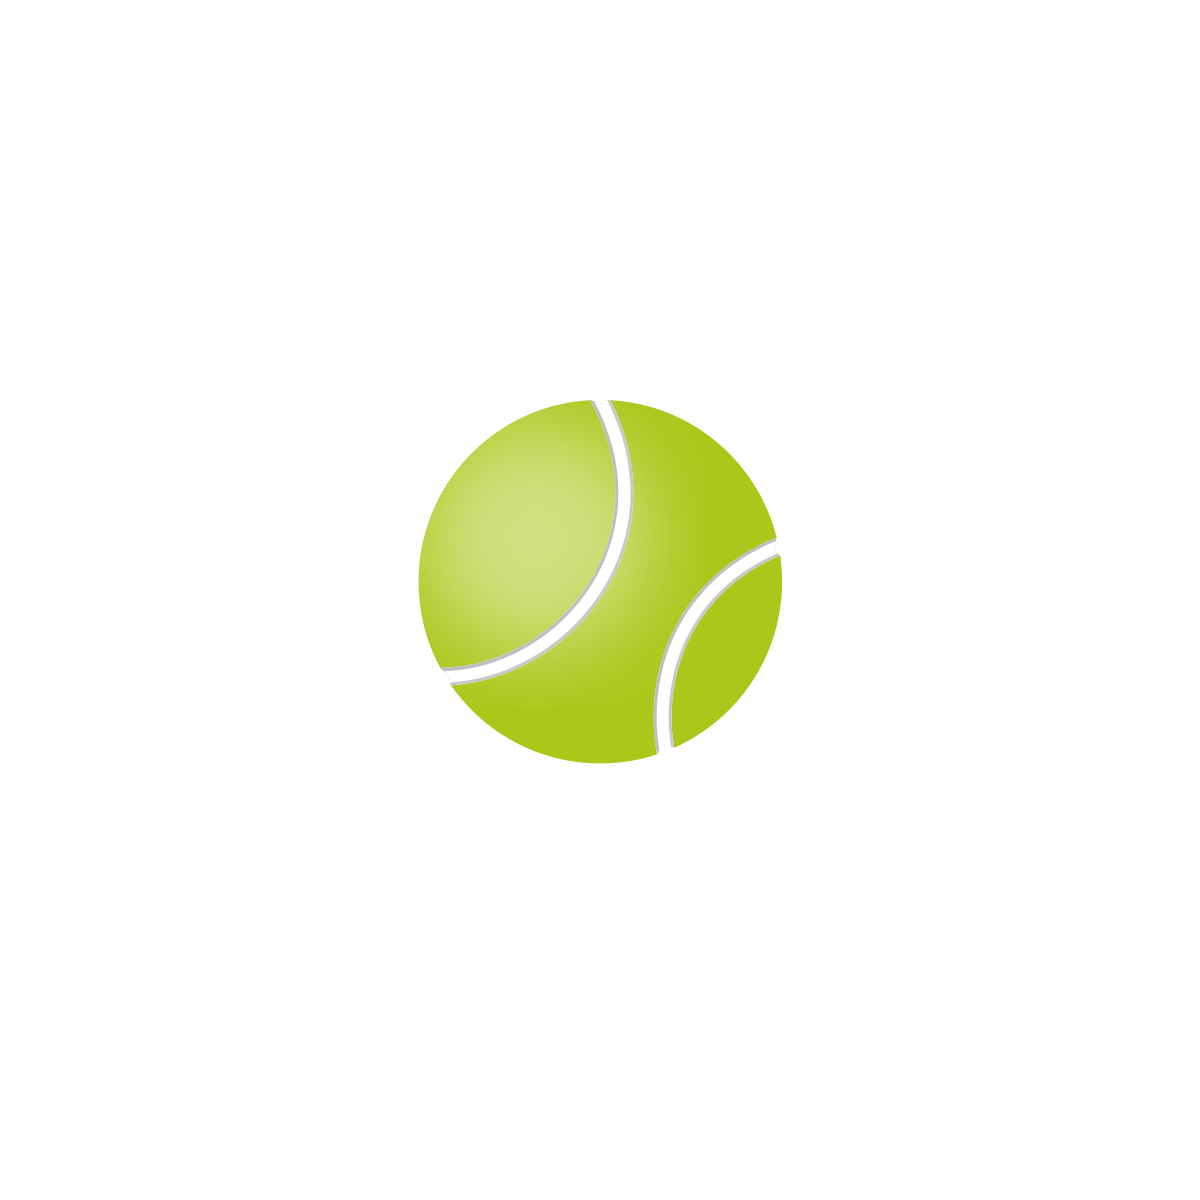 Tennis ball clipart with transparent background 